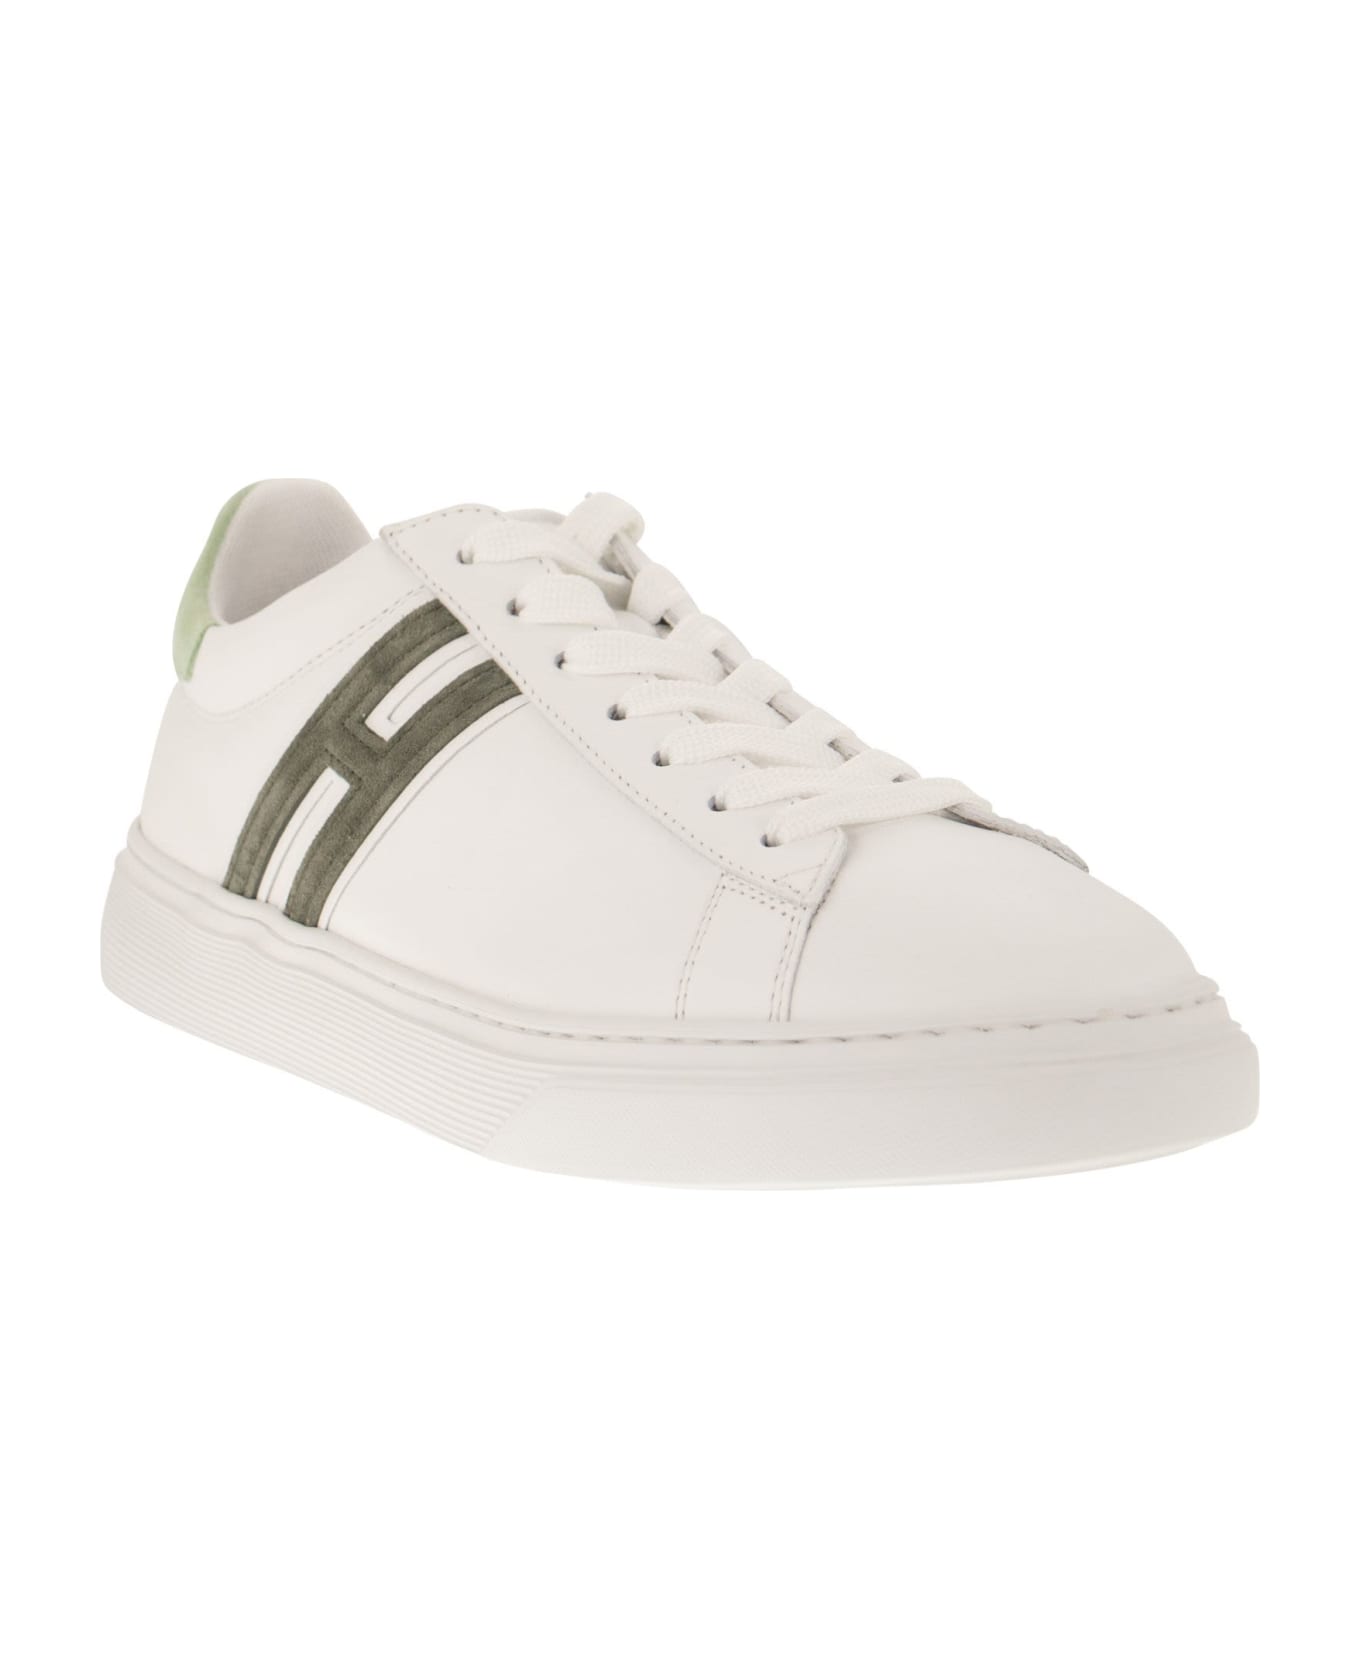 Hogan Sneakers "h365" In Leather - Green/white スニーカー